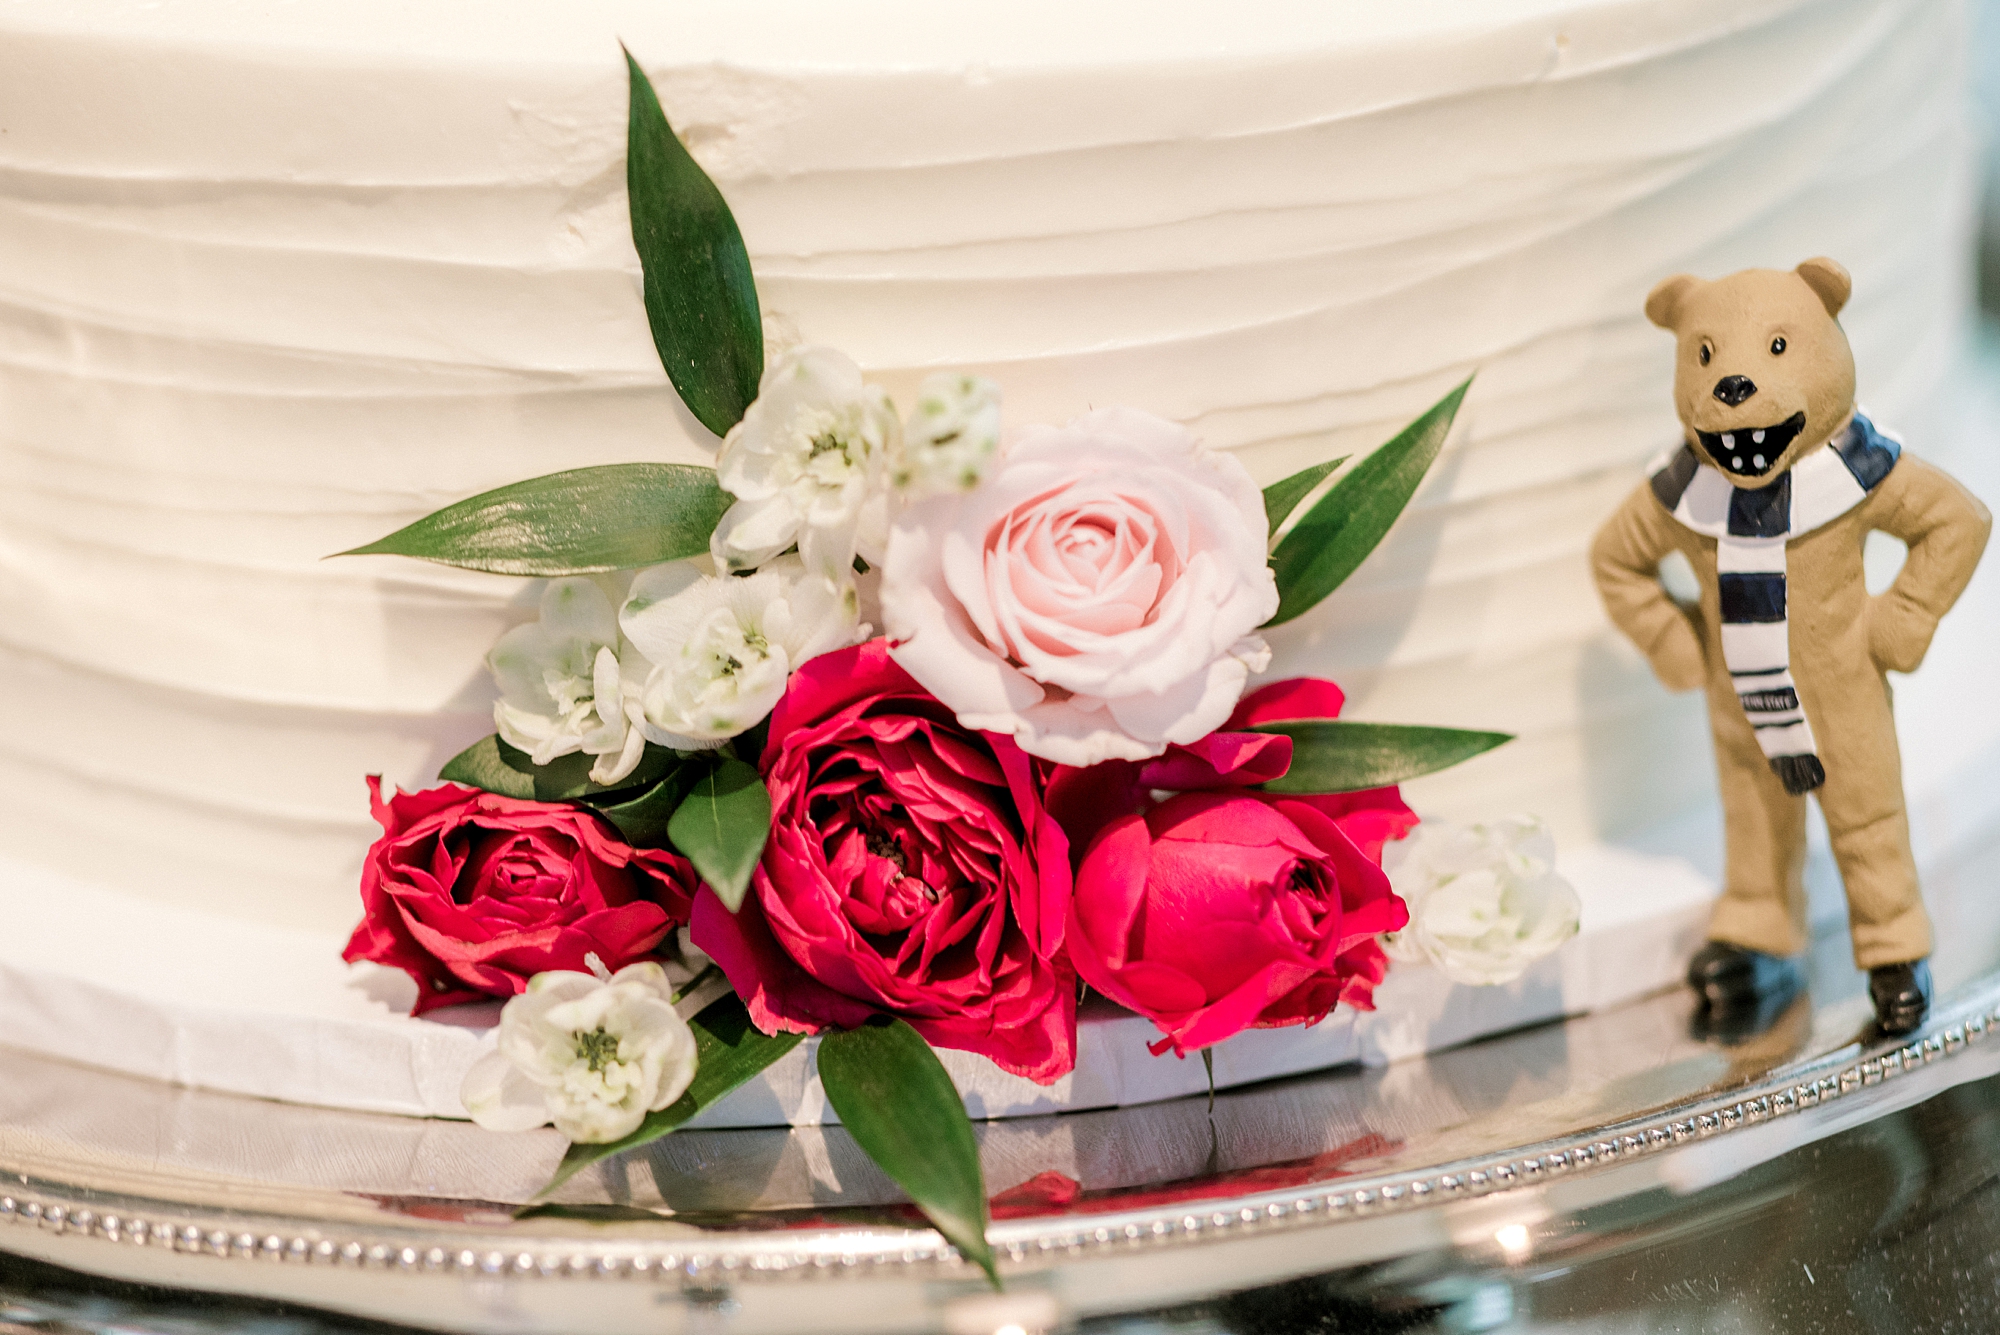 pink roses on wedding cake with white icing